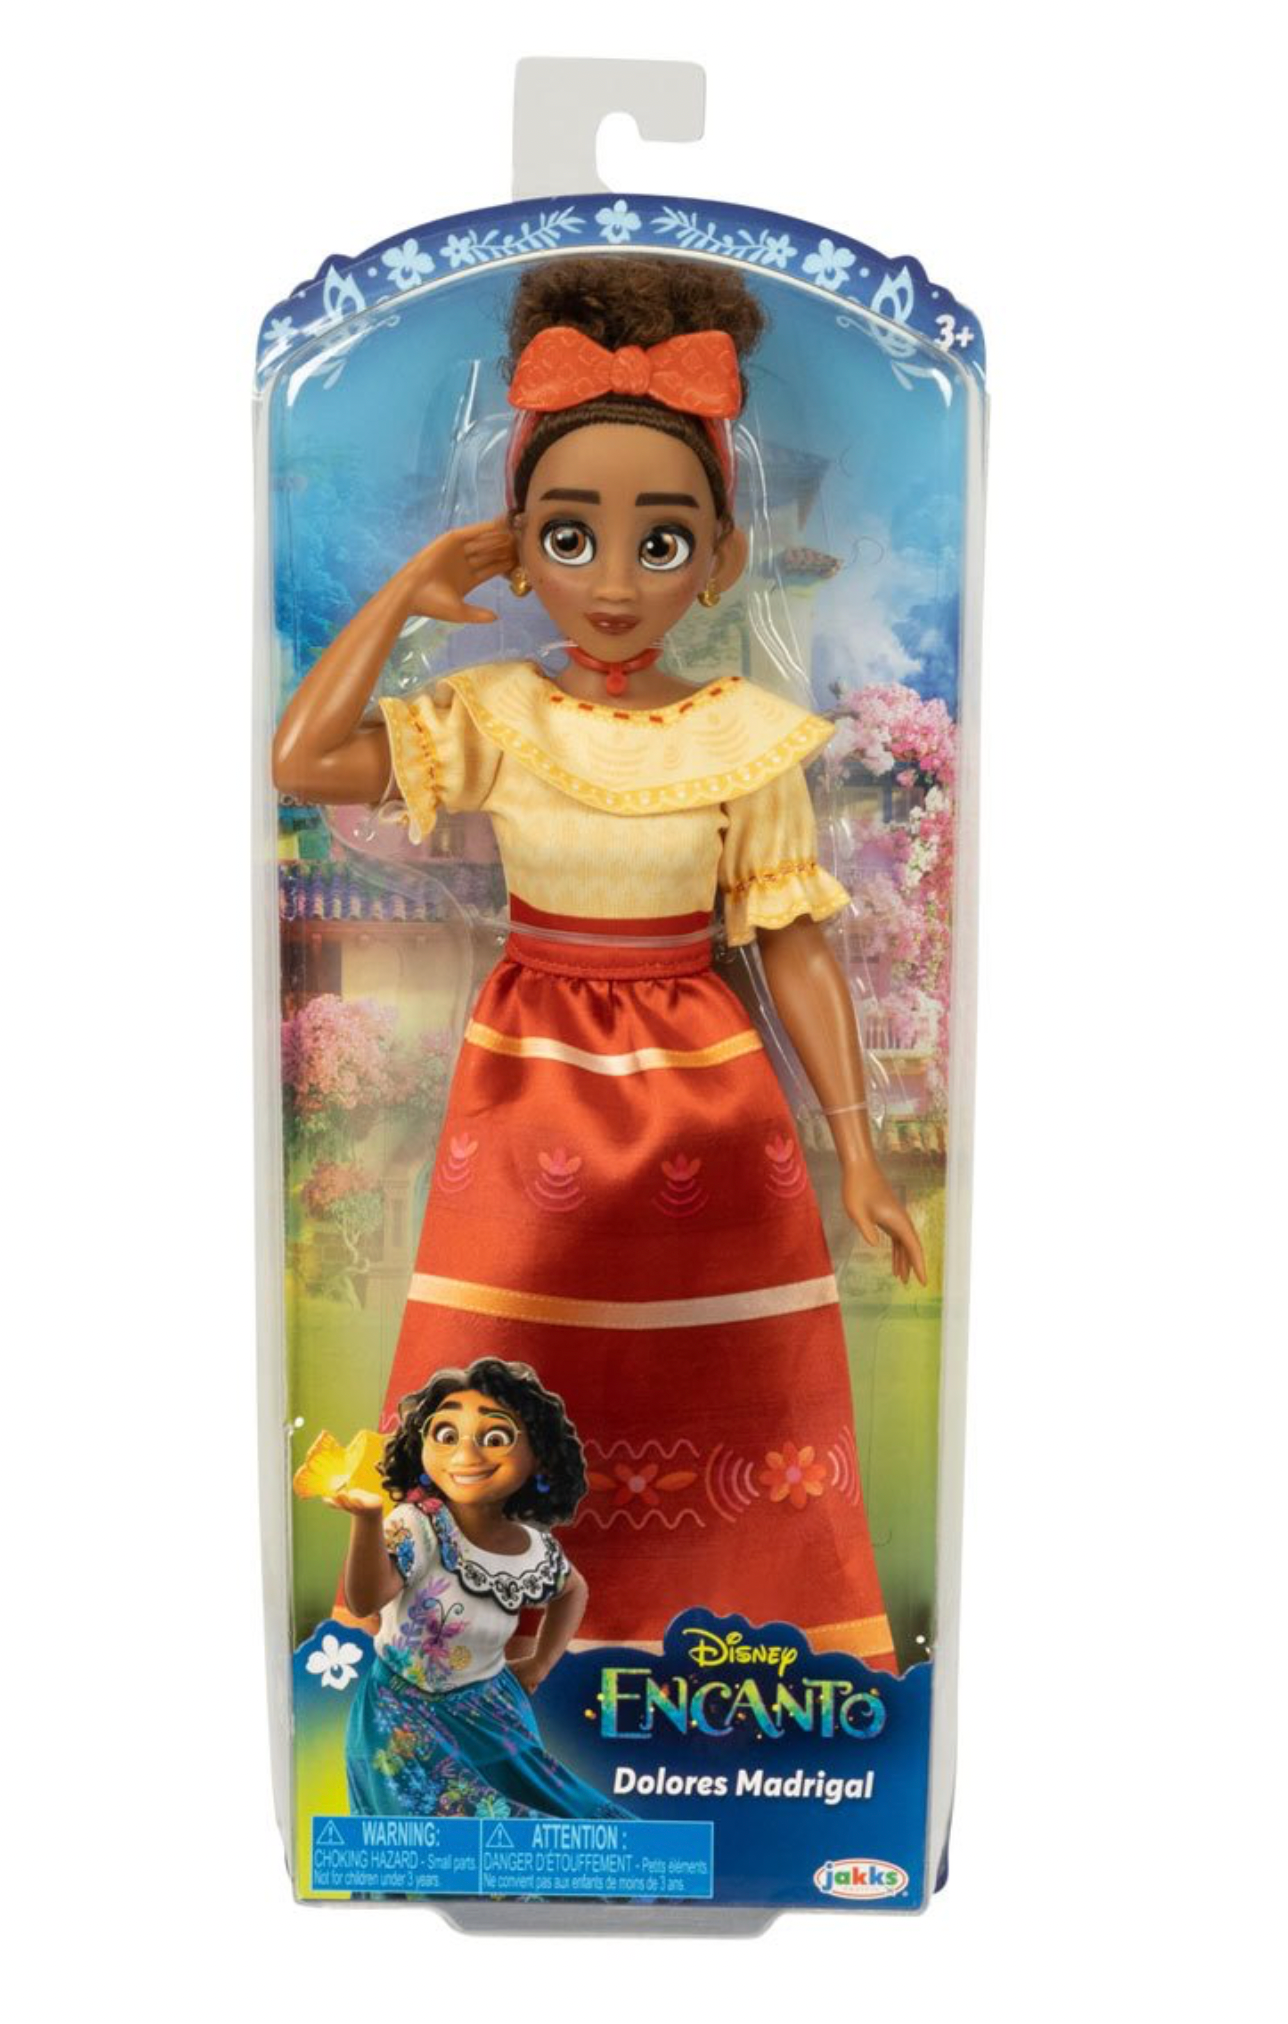 Disney Encanto Dolores Madrigal 11 inch Fashion Doll with Iconic Accessories